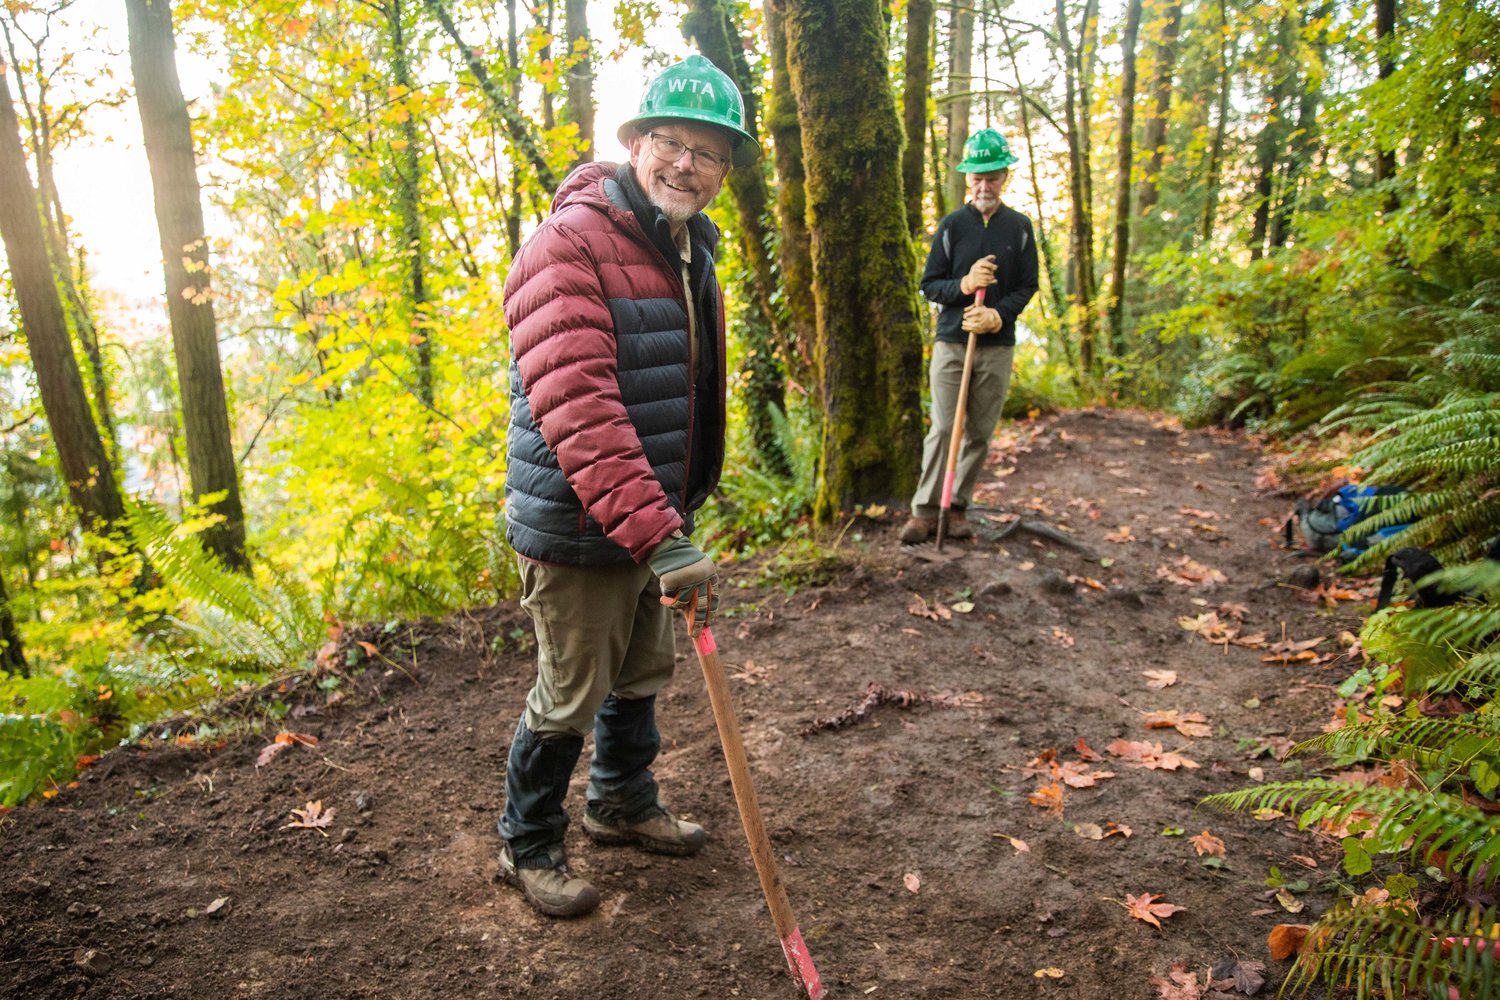 Olympia residents Tom Roalkvam, left, smiles alongside Randy Thorn while doing volunteer trail work at the Seminary Hill Natural Area in Centralia on Wednesday.